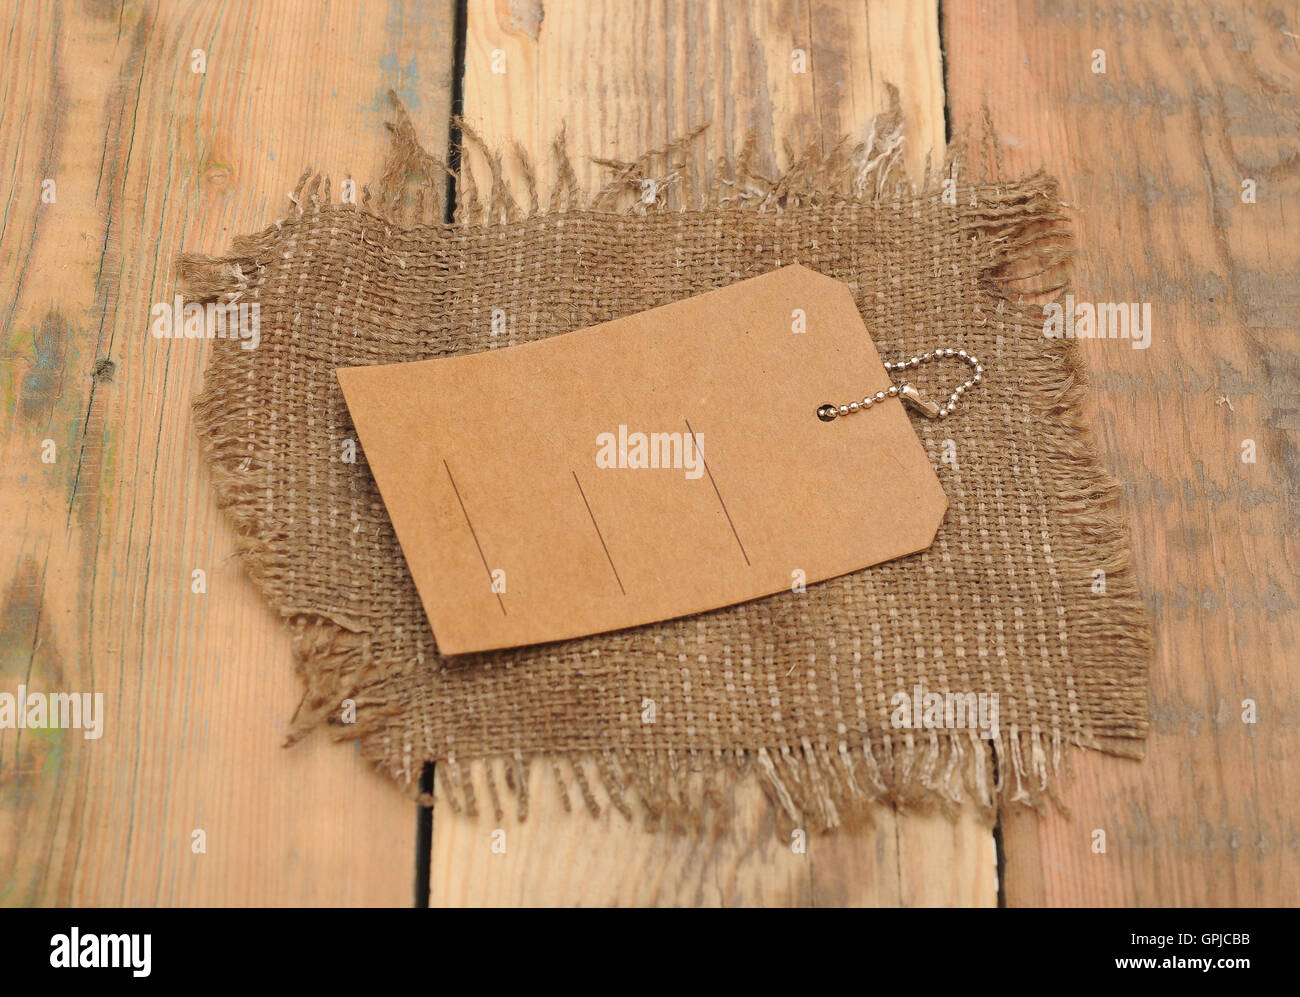 sack burlap background texture and price tag Stock Photo